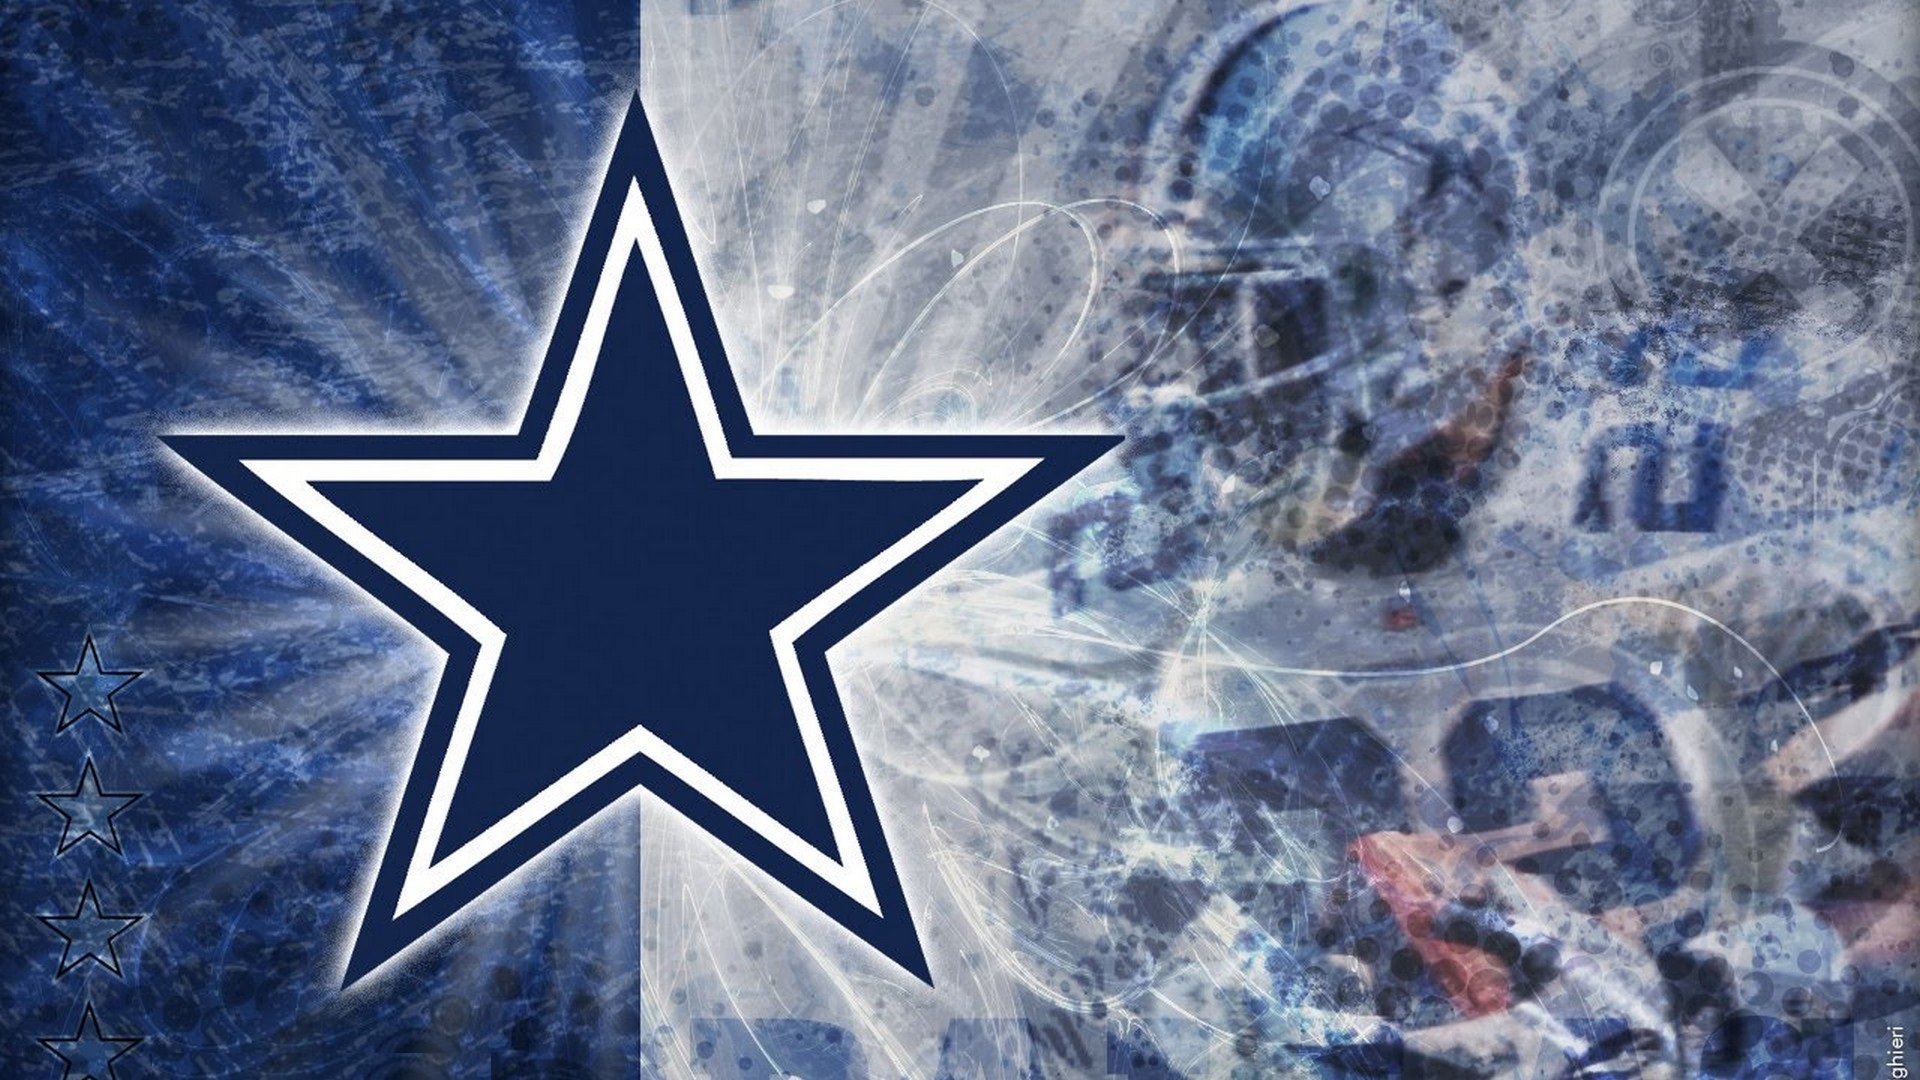 Dallas Cowboys NFL Wallpaper with high-resolution 1920x1080 pixel. You can use this wallpaper for your Mac or Windows Desktop Background, iPhone, Android or Tablet and another Smartphone device